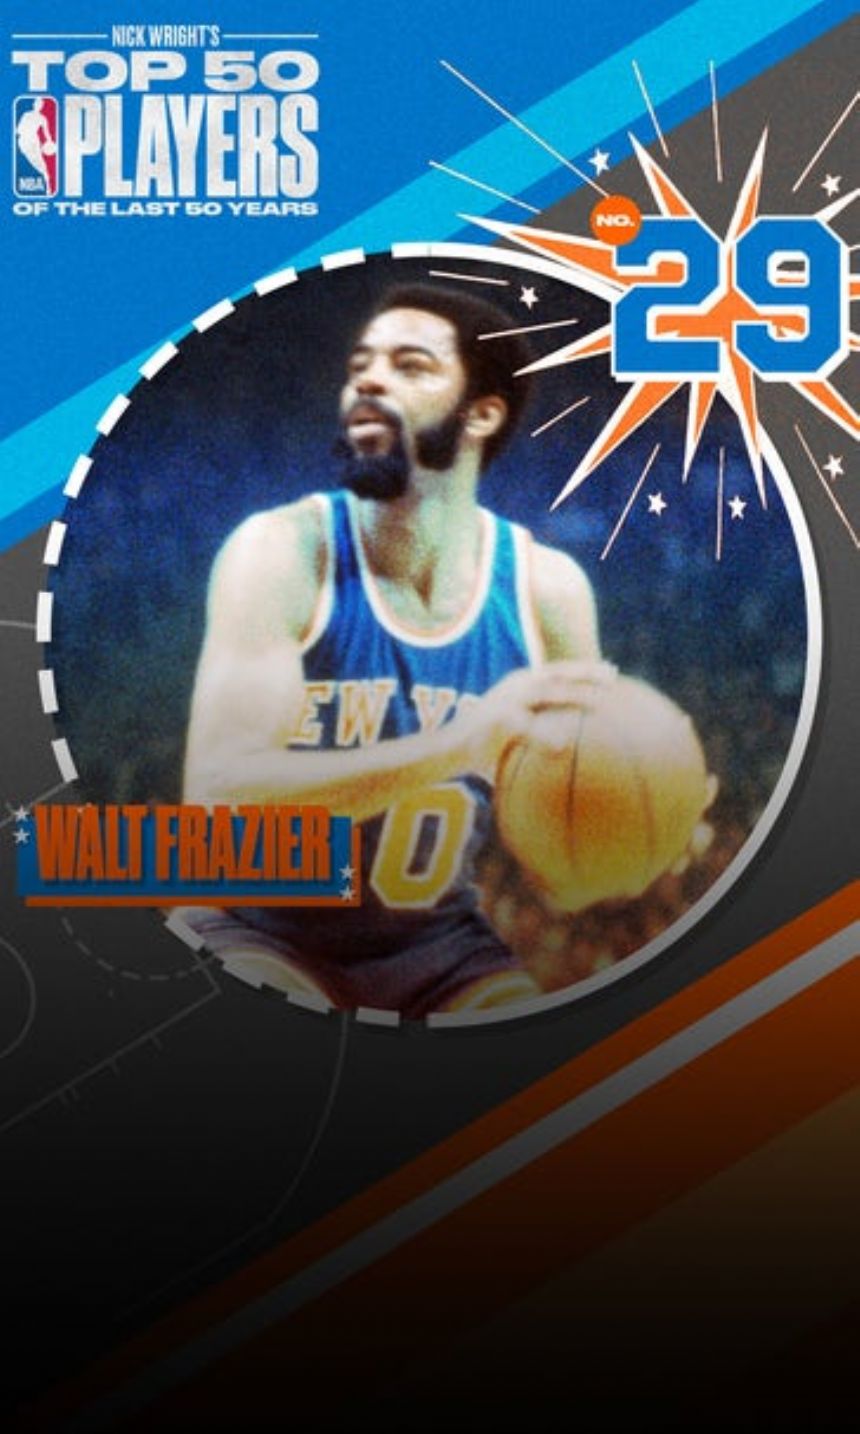 Top 50 NBA players from last 50 years: Walt Frazier ranks No. 29